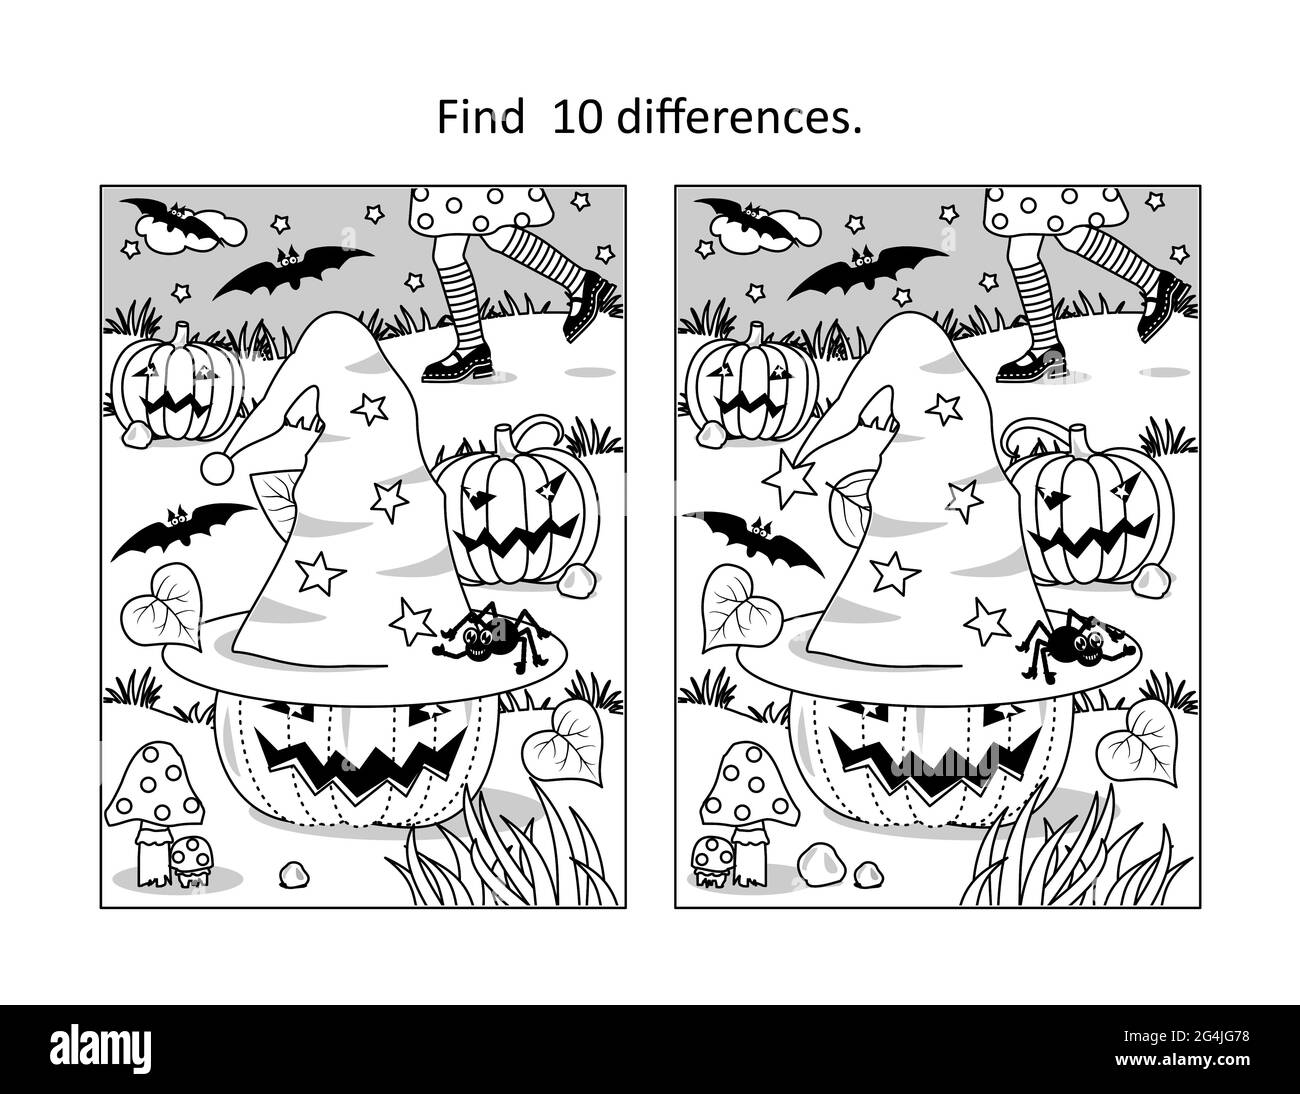 Halloween find 10 differences visual puzzle and coloring page with little witch chasing her hat, pumpkins, bats, spider Stock Photo